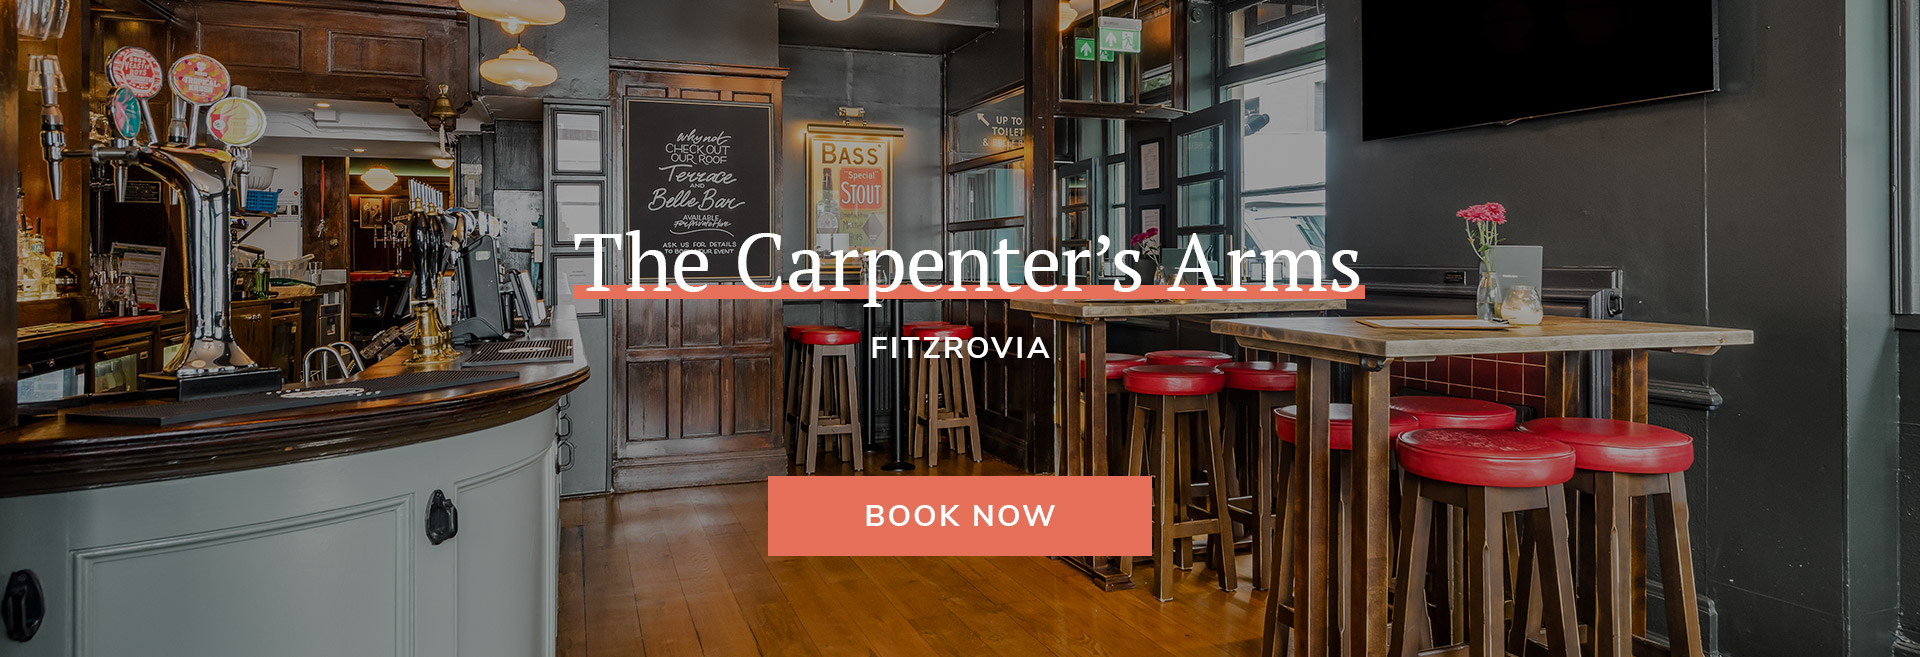 The Carpenter's Arms Banner 3